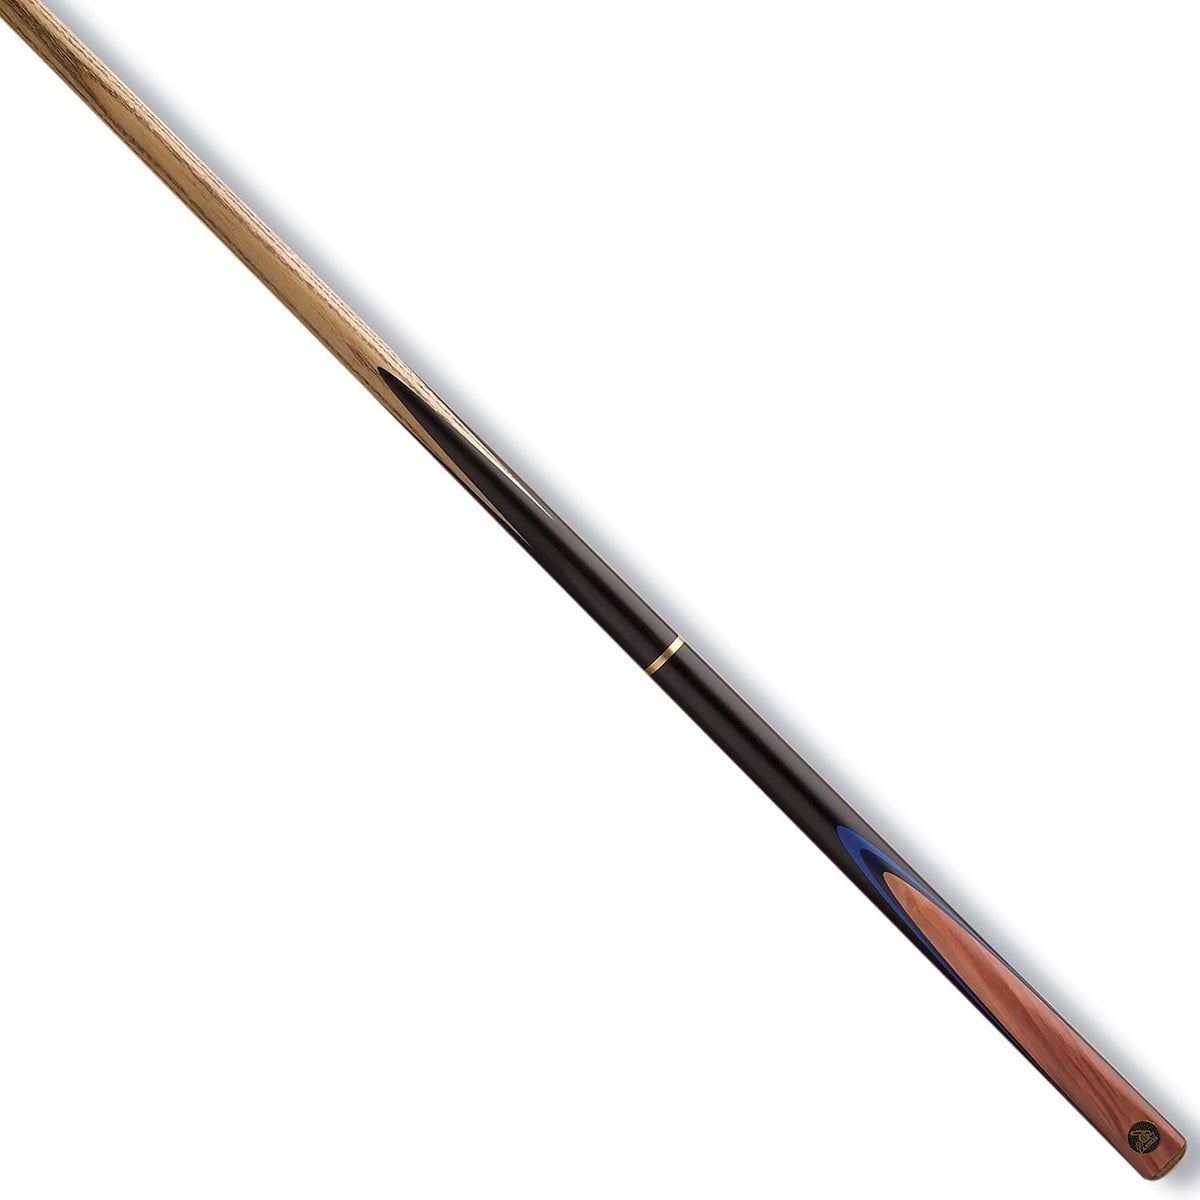 Cannon Sapphire 3/4 Jointed Snooker Cue. On angle view